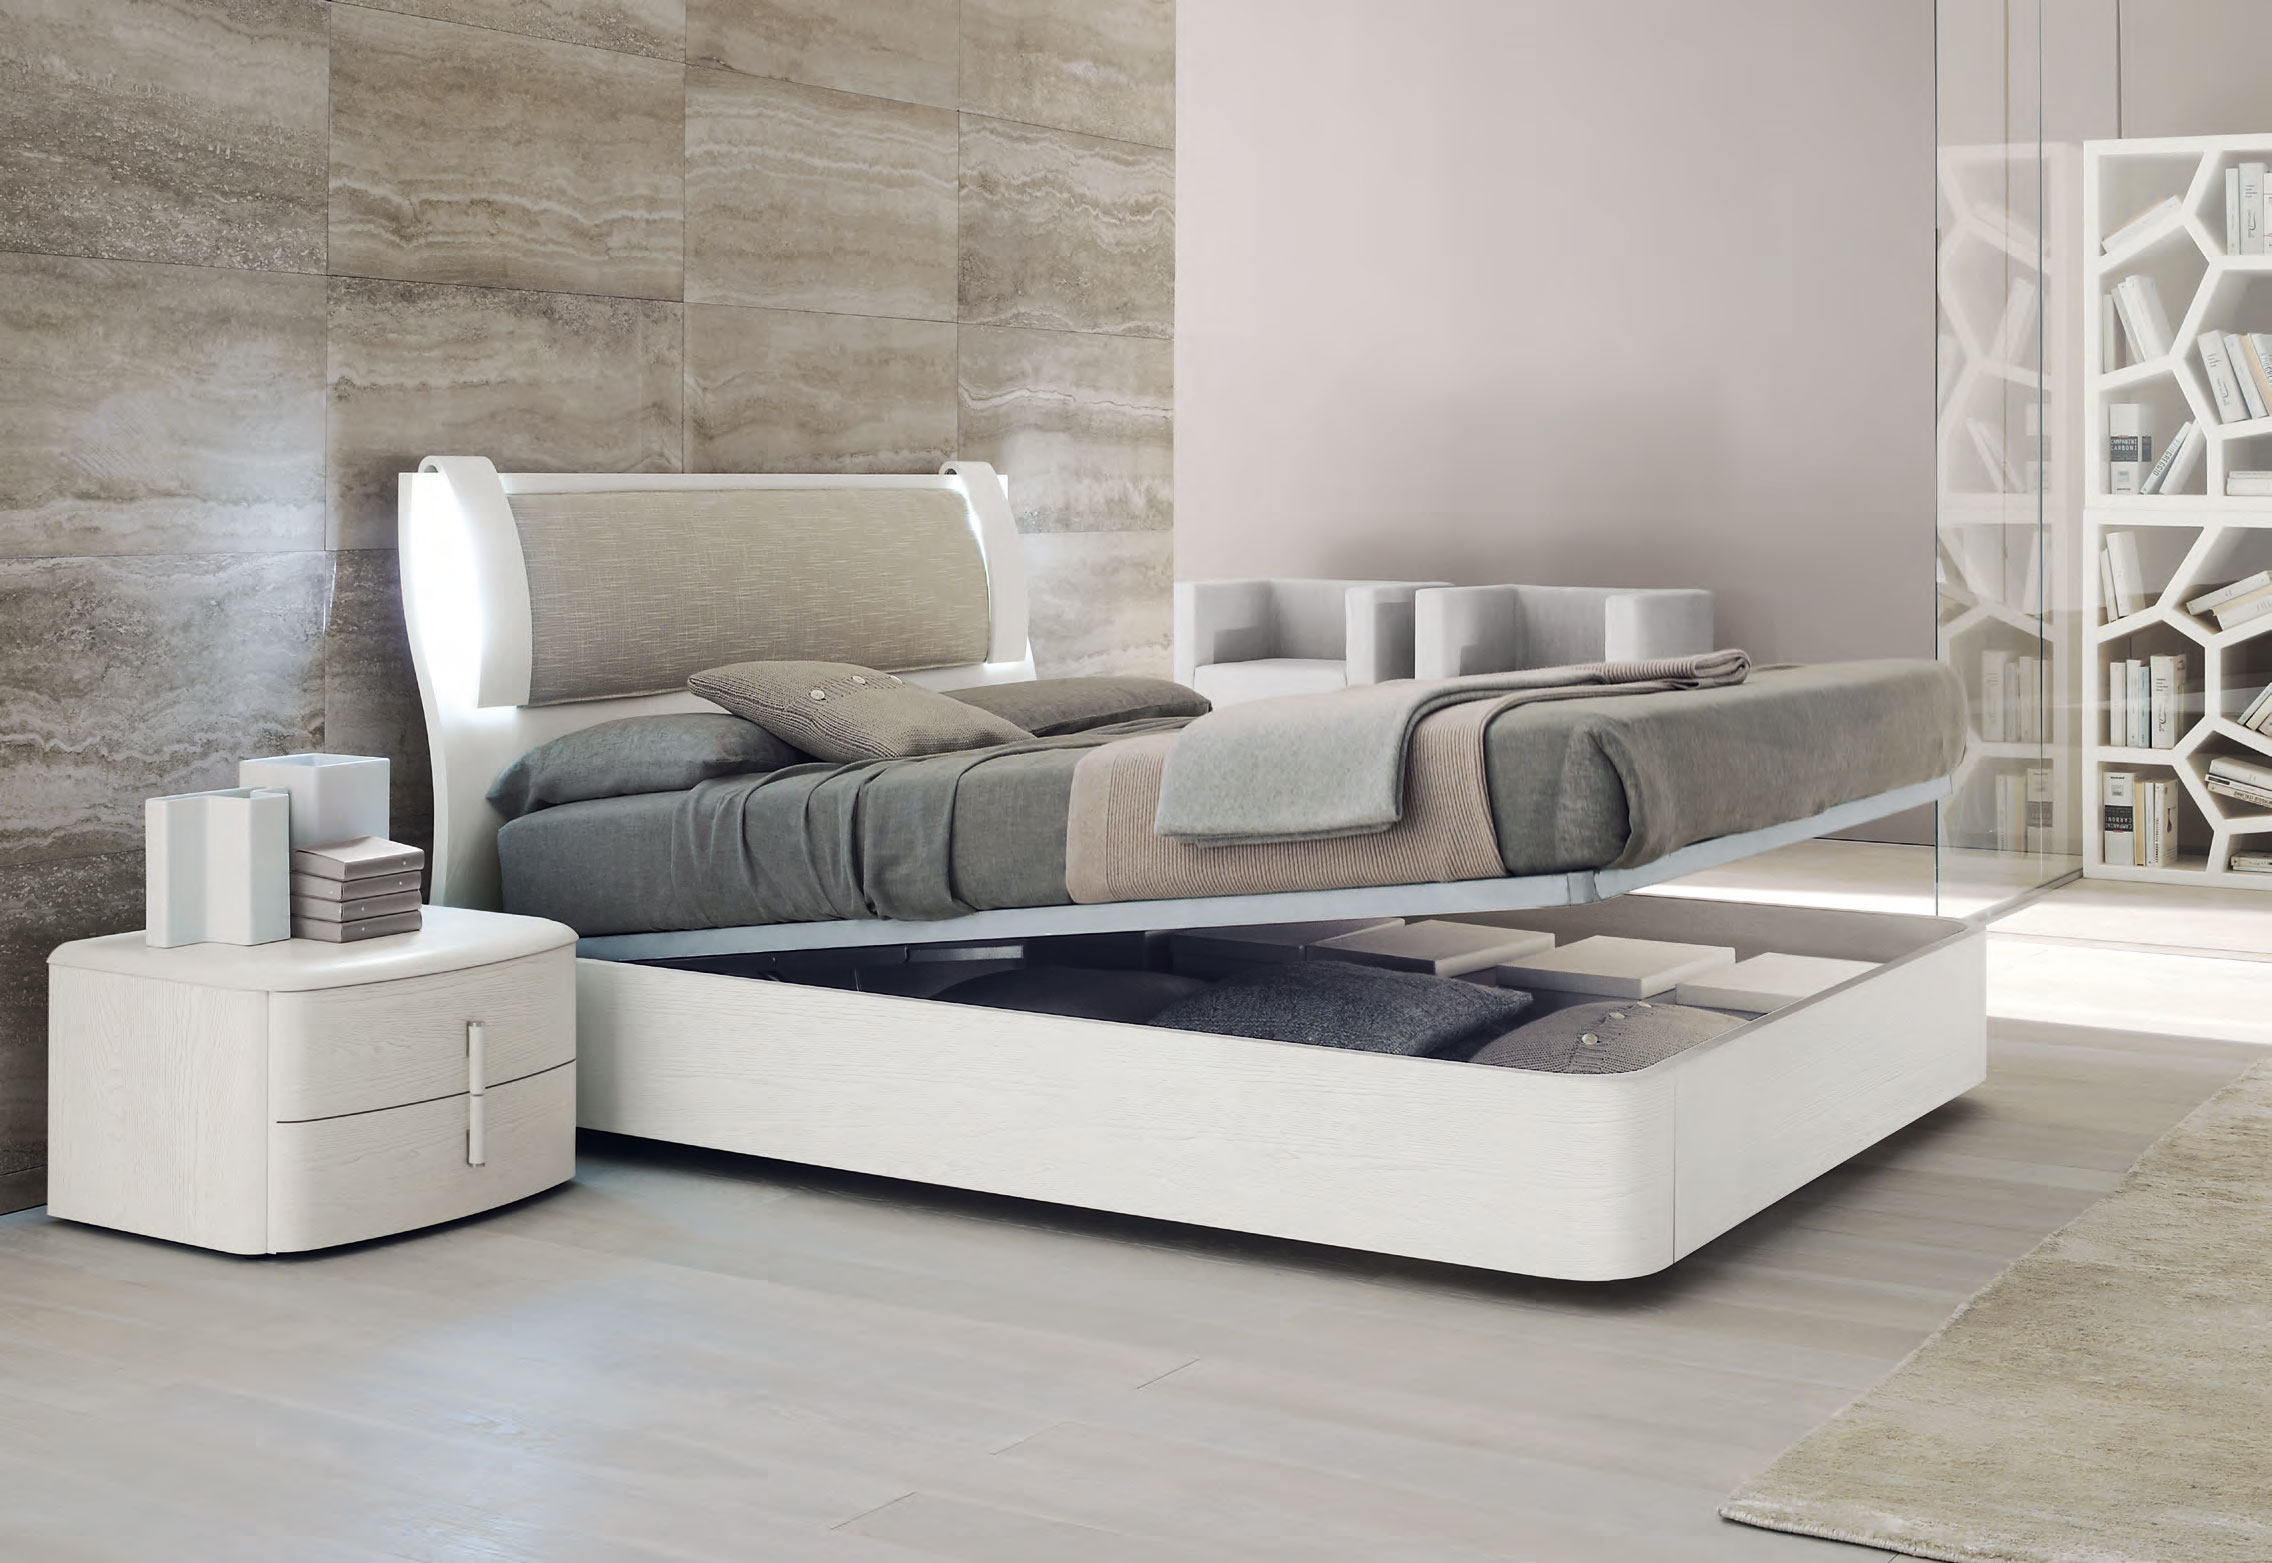 Modern Bedroom Reclinig Surprising Modern Bedroom With White Reclining Bed Furnished With Gray Cover Also Pillows Of Modern Bedroom Furniture Completed With Nightstand Drawers And Density Rug Furniture Modern Bedroom Furniture: The Platform Style